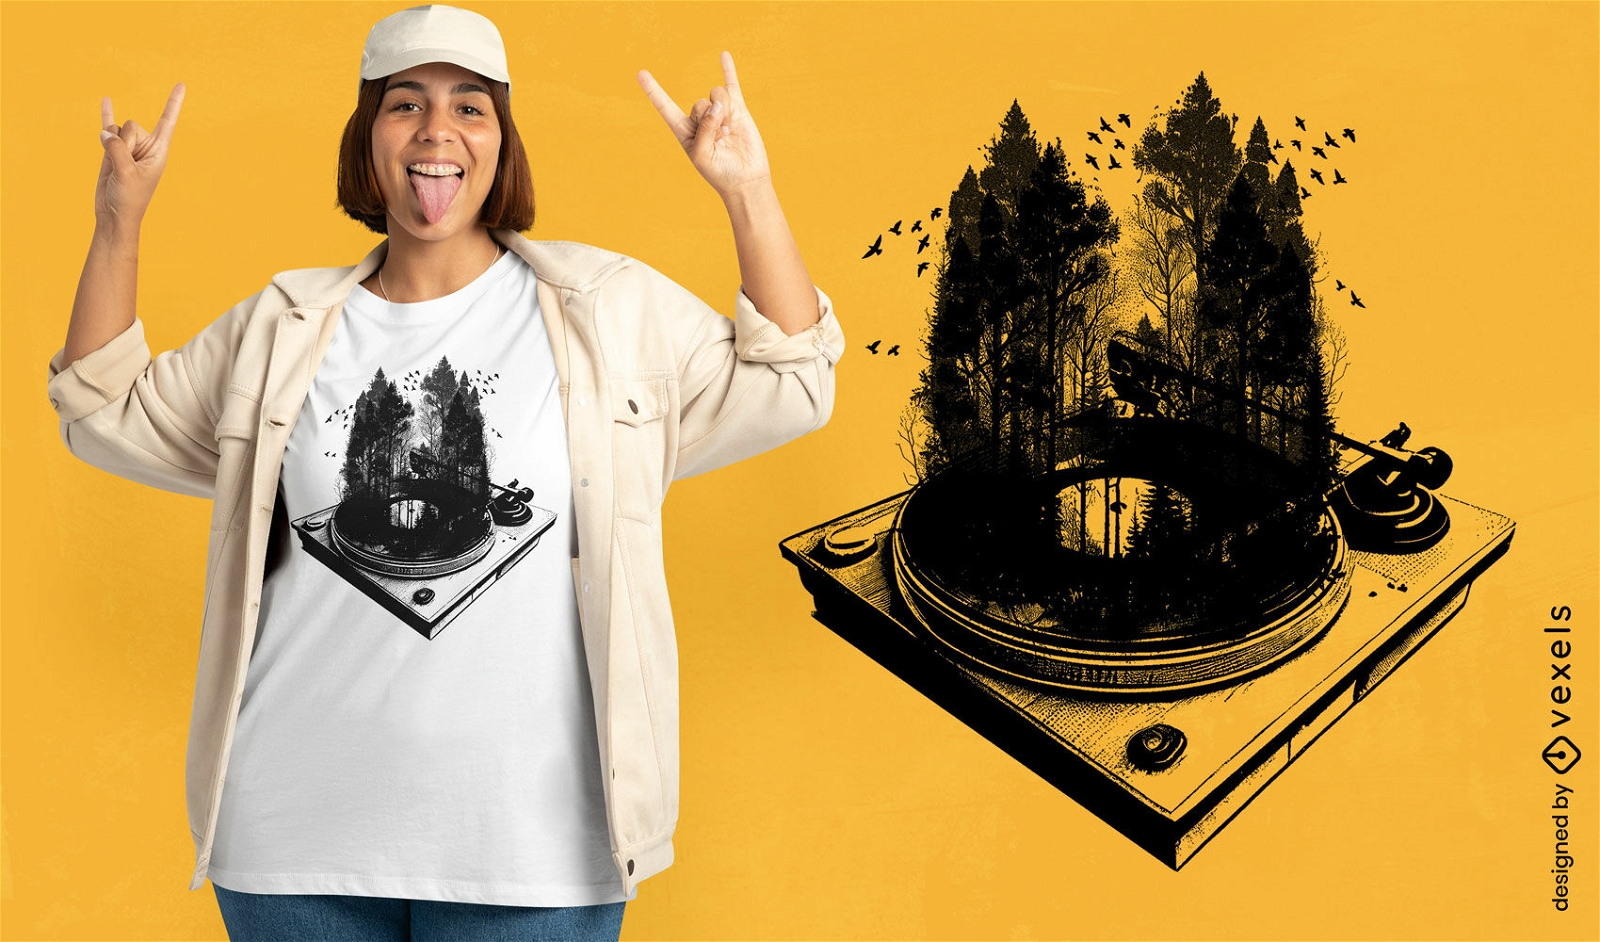 Nature-infused turntable t-shirt design